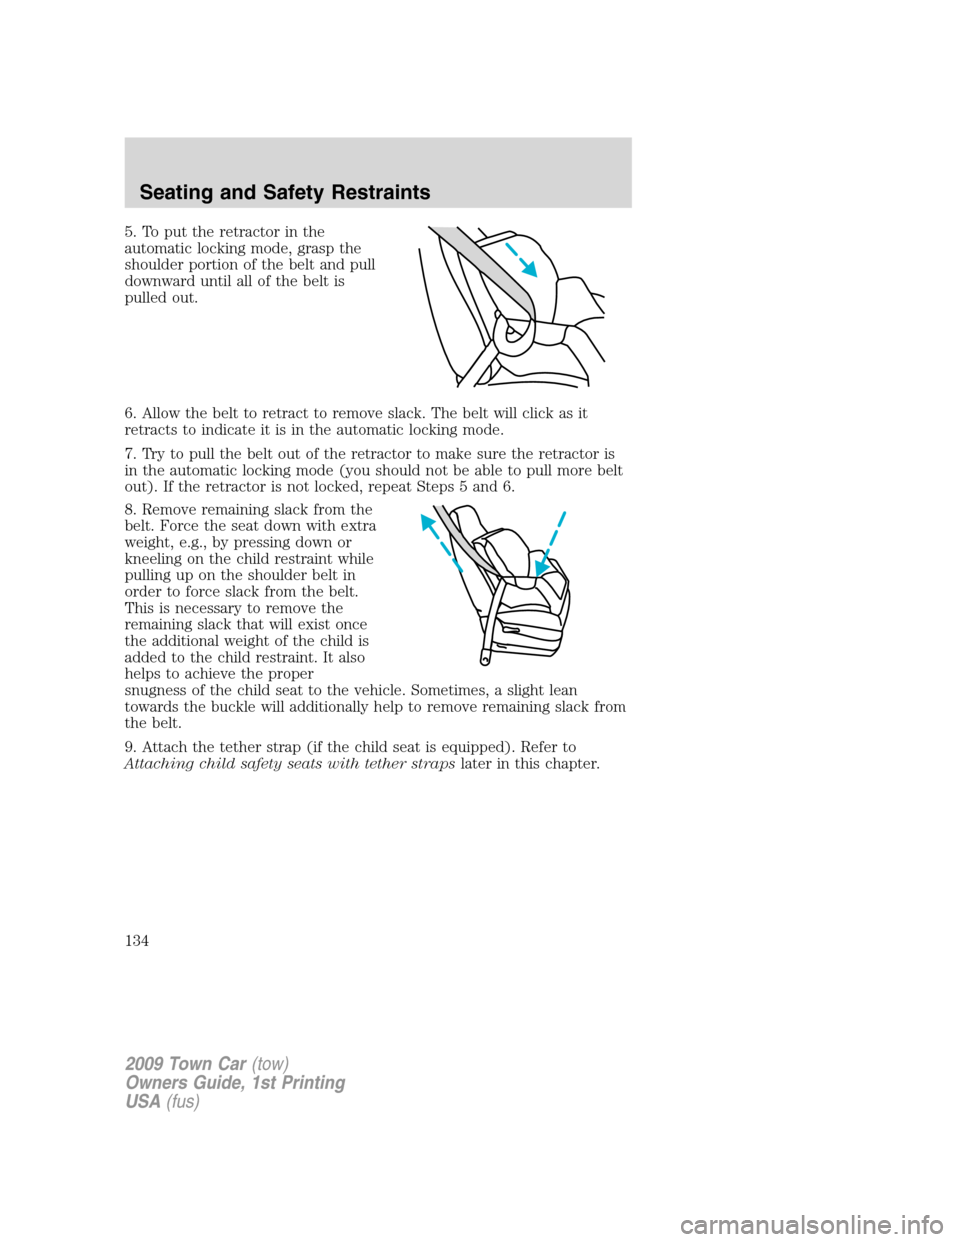 LINCOLN TOWN CAR 2009  Owners Manual 5. To put the retractor in the
automatic locking mode, grasp the
shoulder portion of the belt and pull
downward until all of the belt is
pulled out.
6. Allow the belt to retract to remove slack. The b